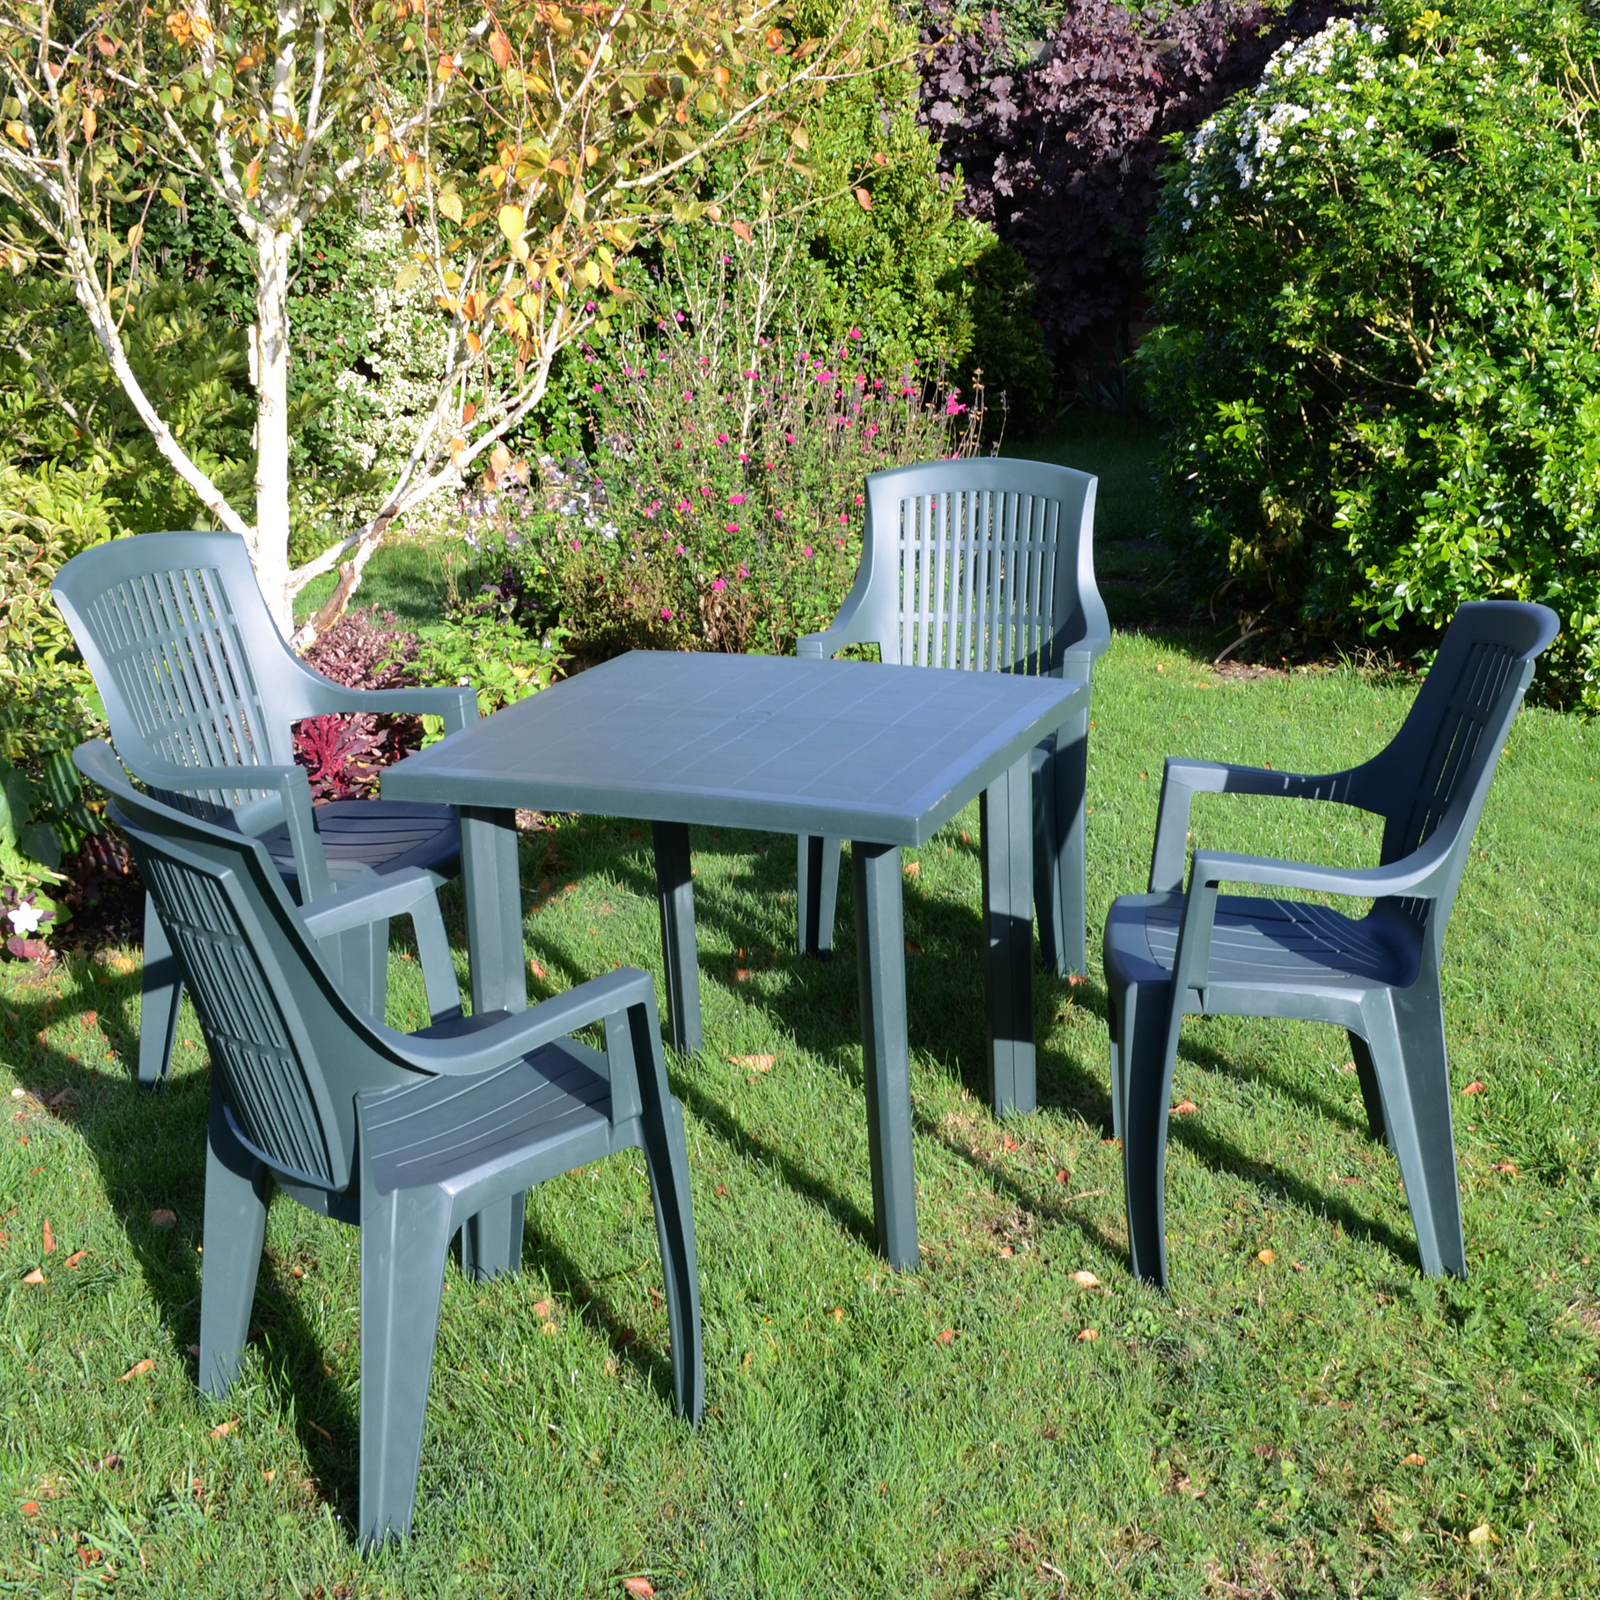 Trabella Rapino Square Table With 4 Parma Chairs Set Green Dining Sets Trabella   